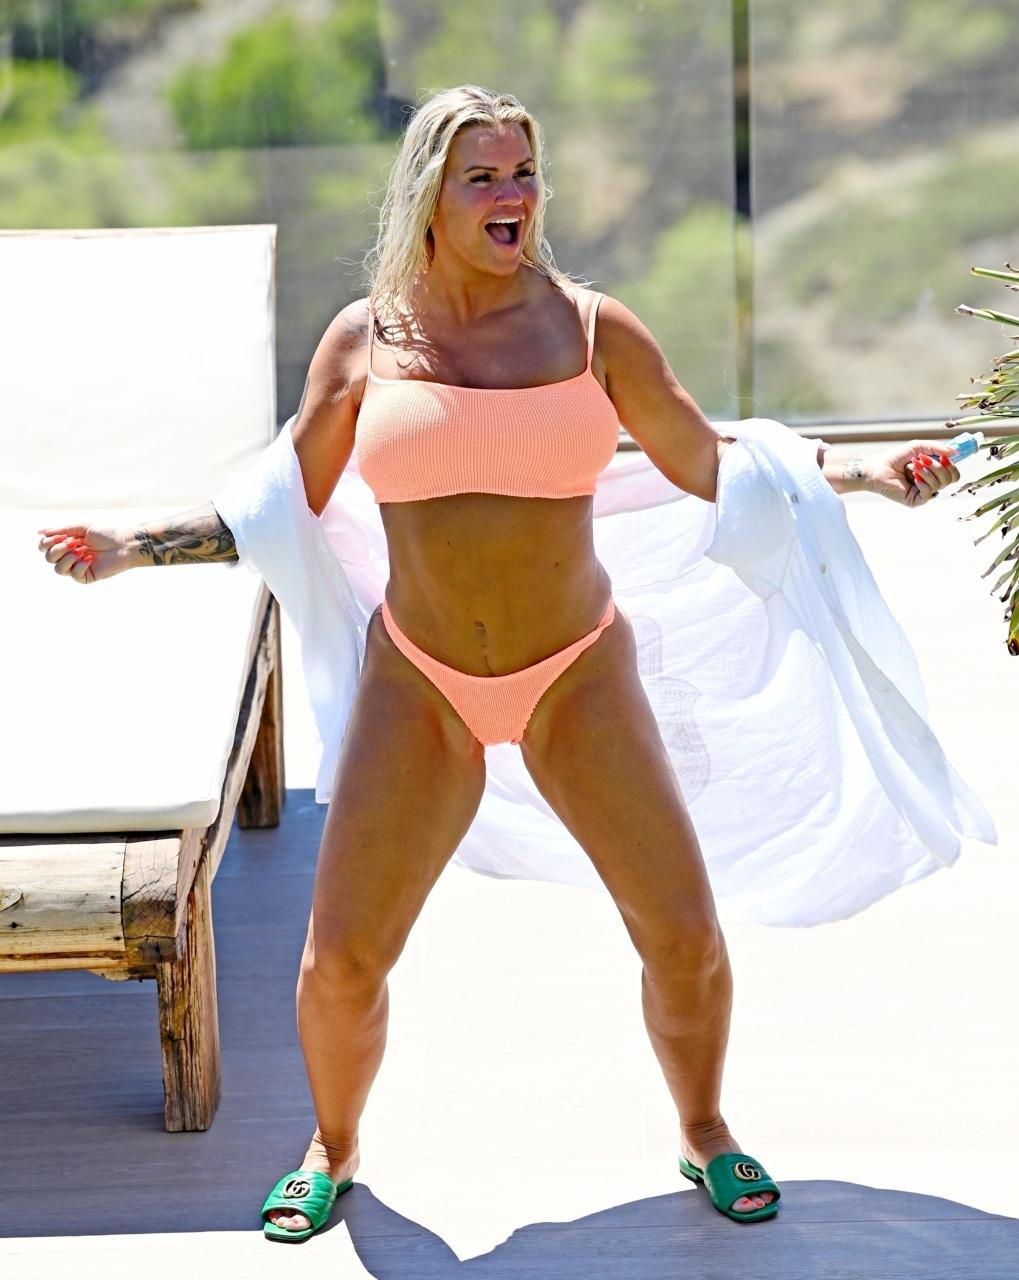 Kerry Katona looked incredible as she showed off her figure on holiday in Marbella